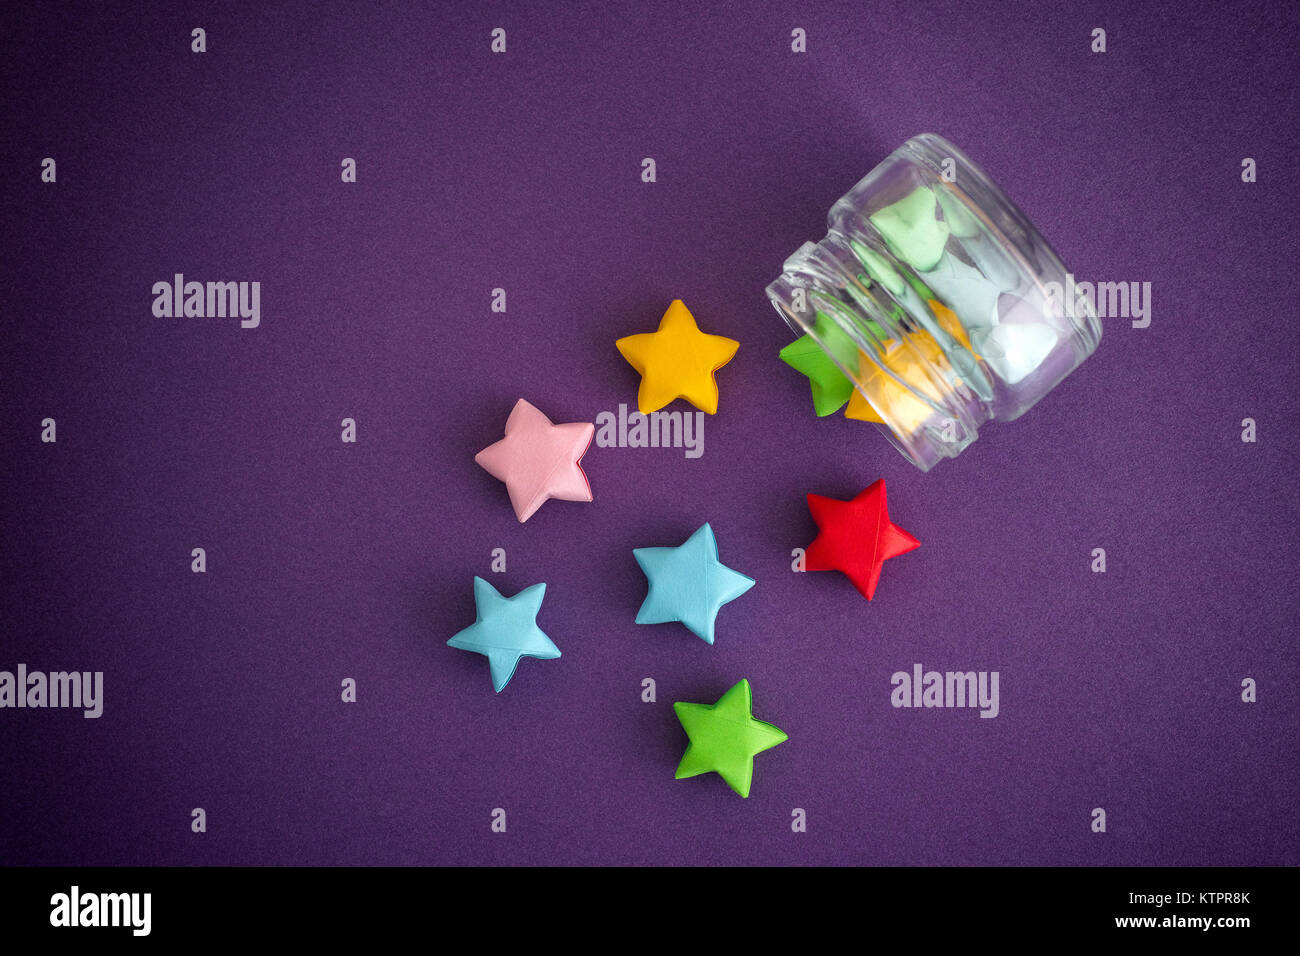 Colourful origami lucky stars spilling out of a jar. Purple background. Stock Photo